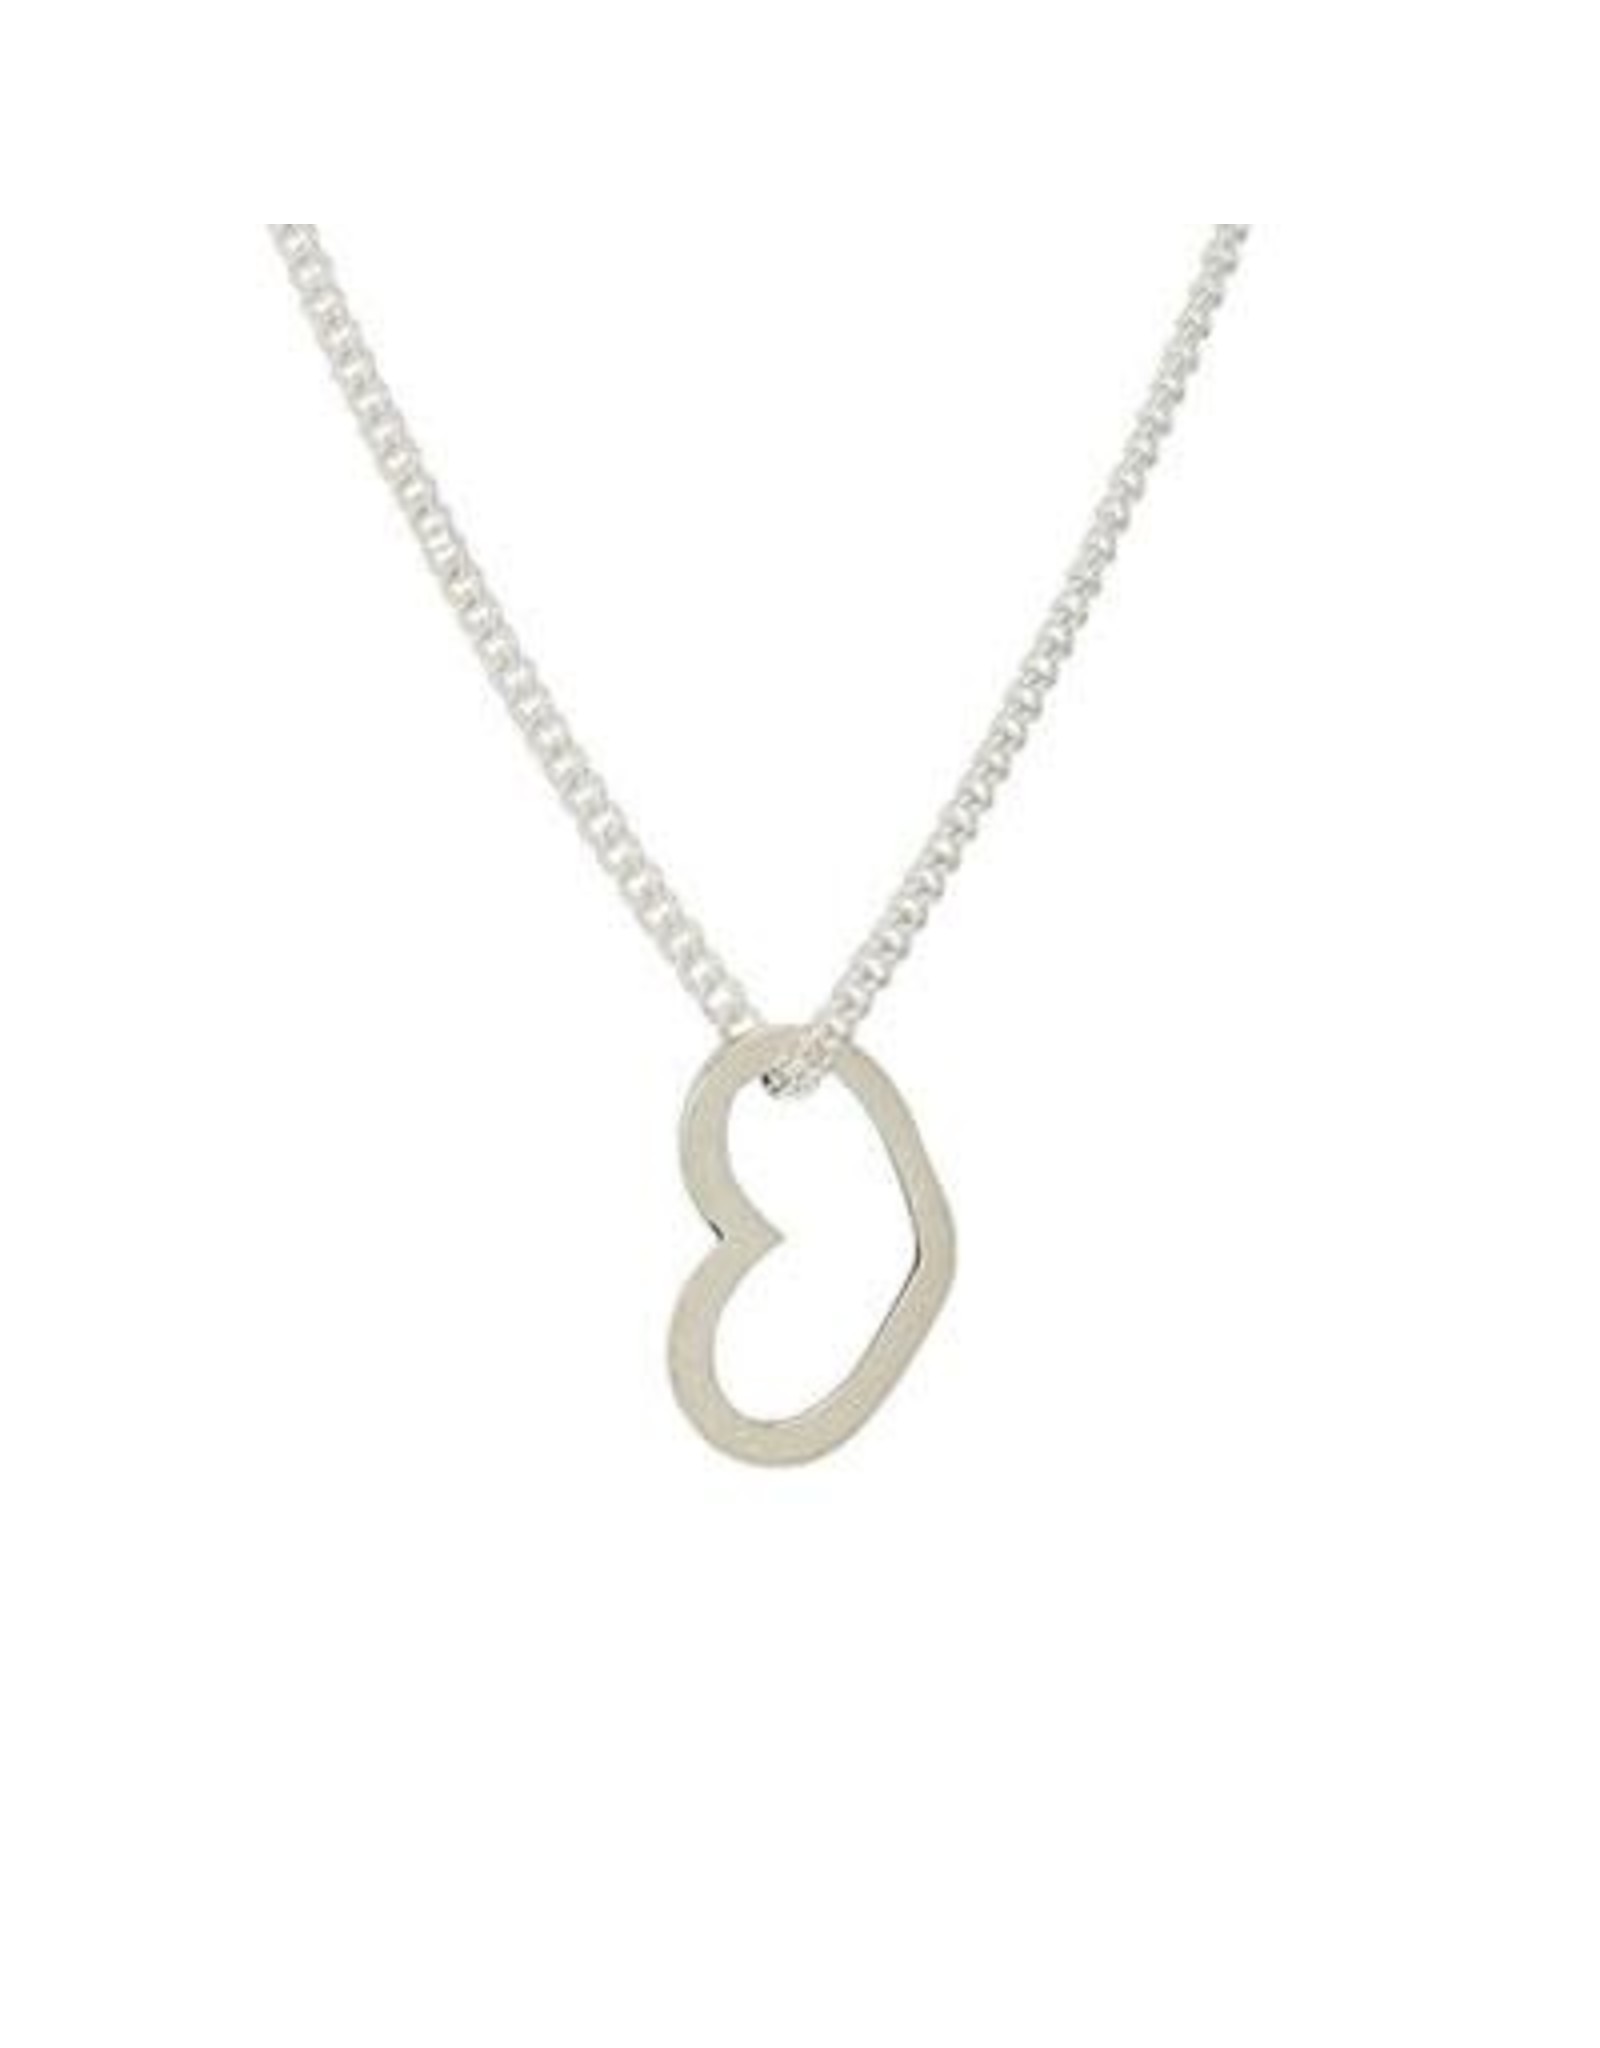 Dainty heart sterling necklace